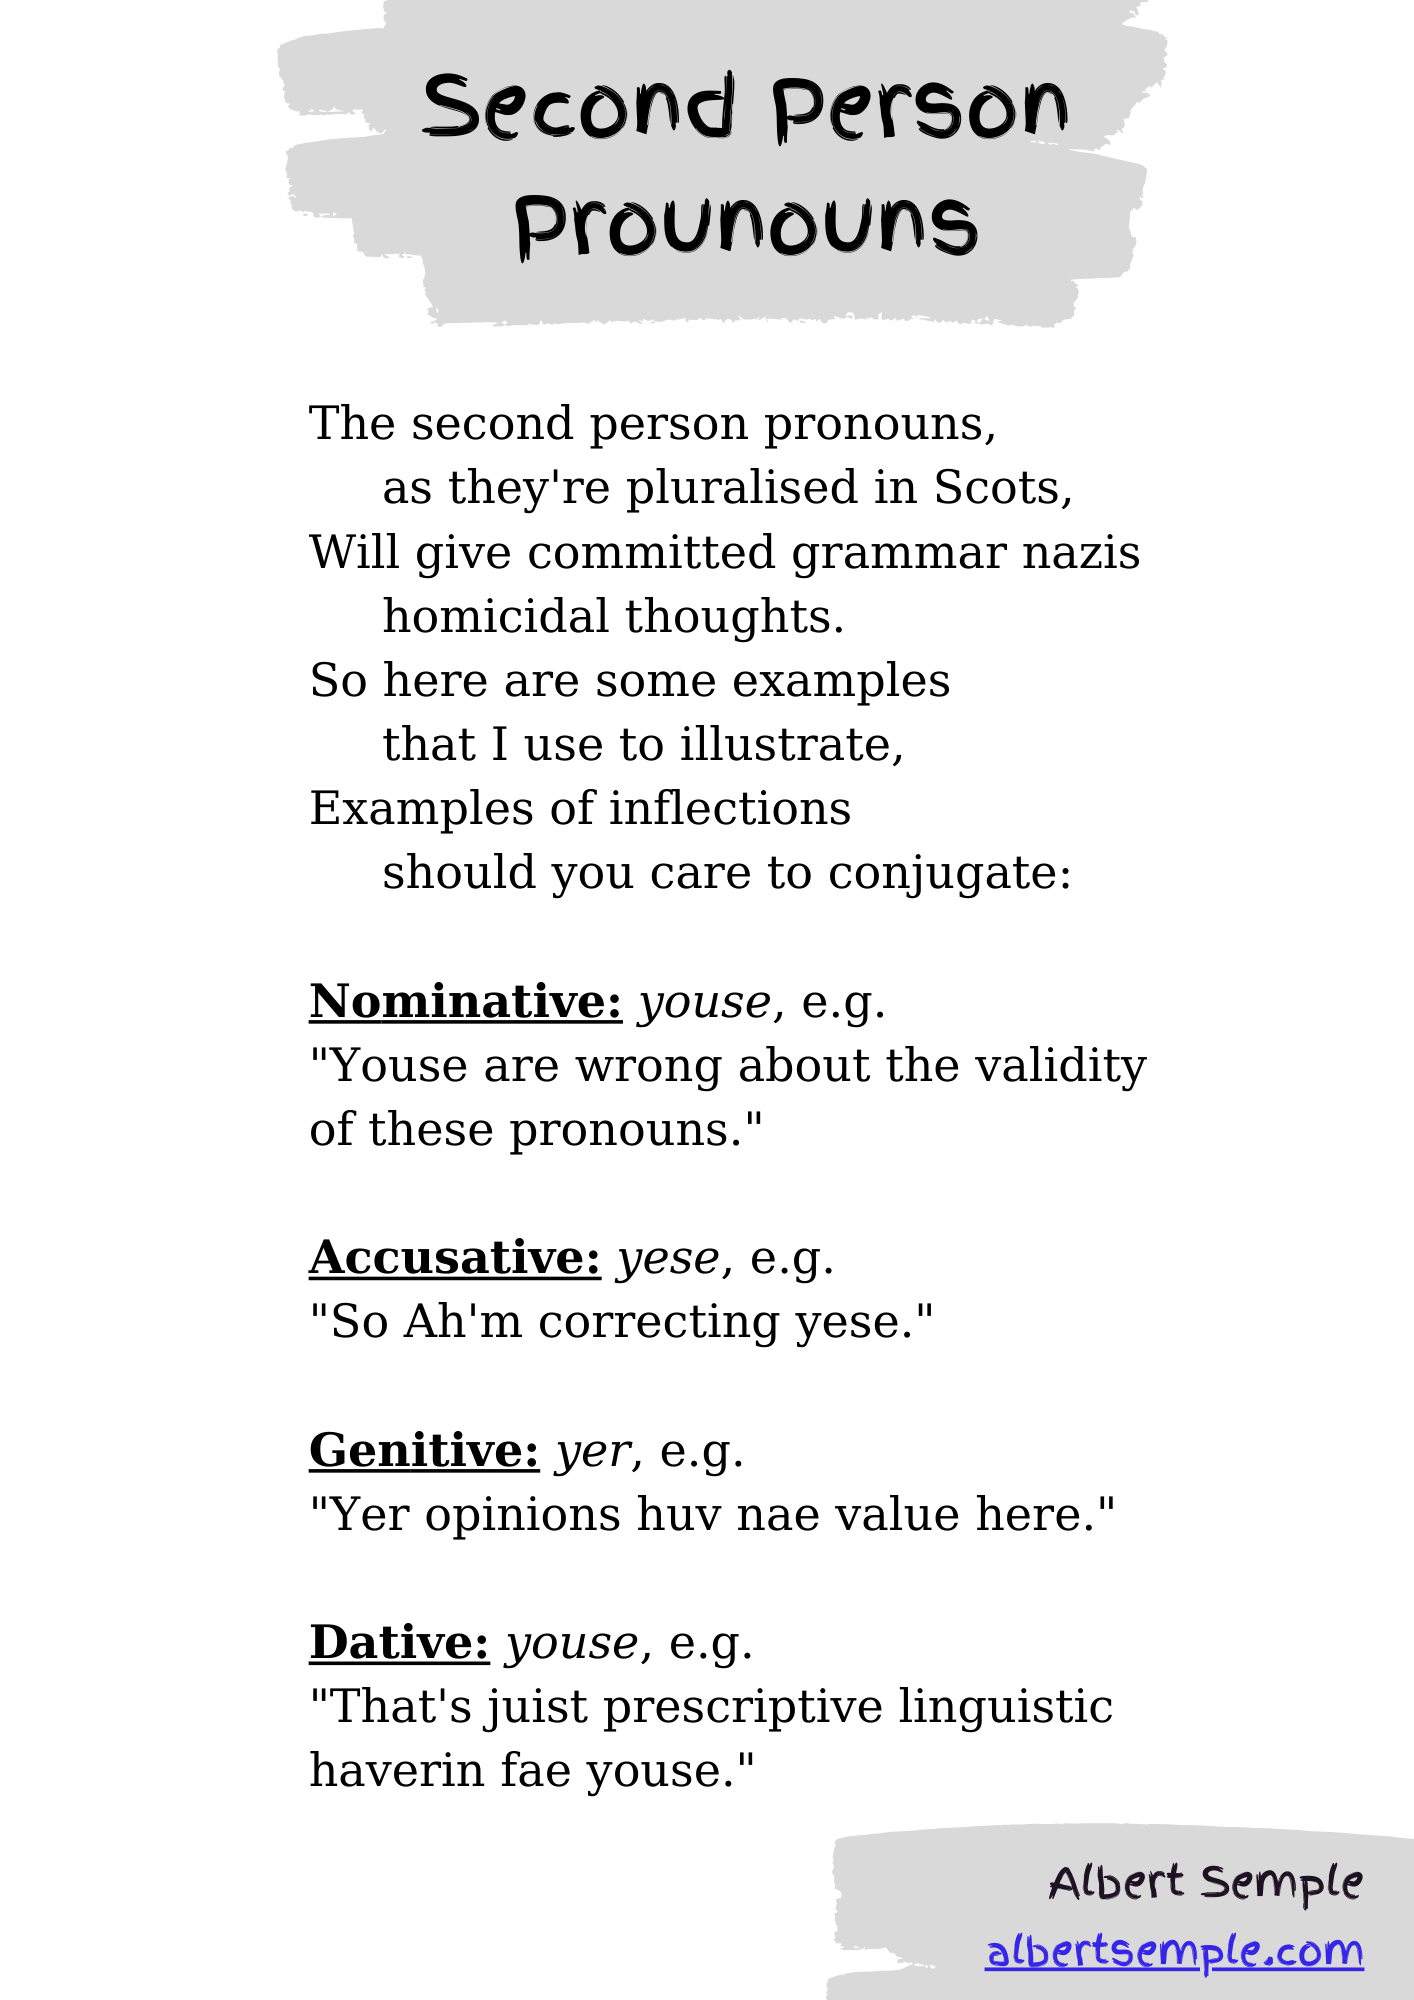 The second person pronouns,
 as they're pluralised in Scots,
Will give committed grammar nazis
 homicidal thoughts.
So here are some examples
 that I use to illustrate,
Examples of inflections
 should you care to conjugate:
Nominative: youse, e.g.
 ＂Youse are wrang aboot the validity a these pronouns.＂
Accusative: yese, e.g.
 ＂So Ah'm correcting yese.＂
Genitive: yer, e.g.
 ＂Yer opinions huv nae value here.＂
Dative: youse, e.g.
 ＂That's juist prescriptive linguistic haverin fae youse.＂